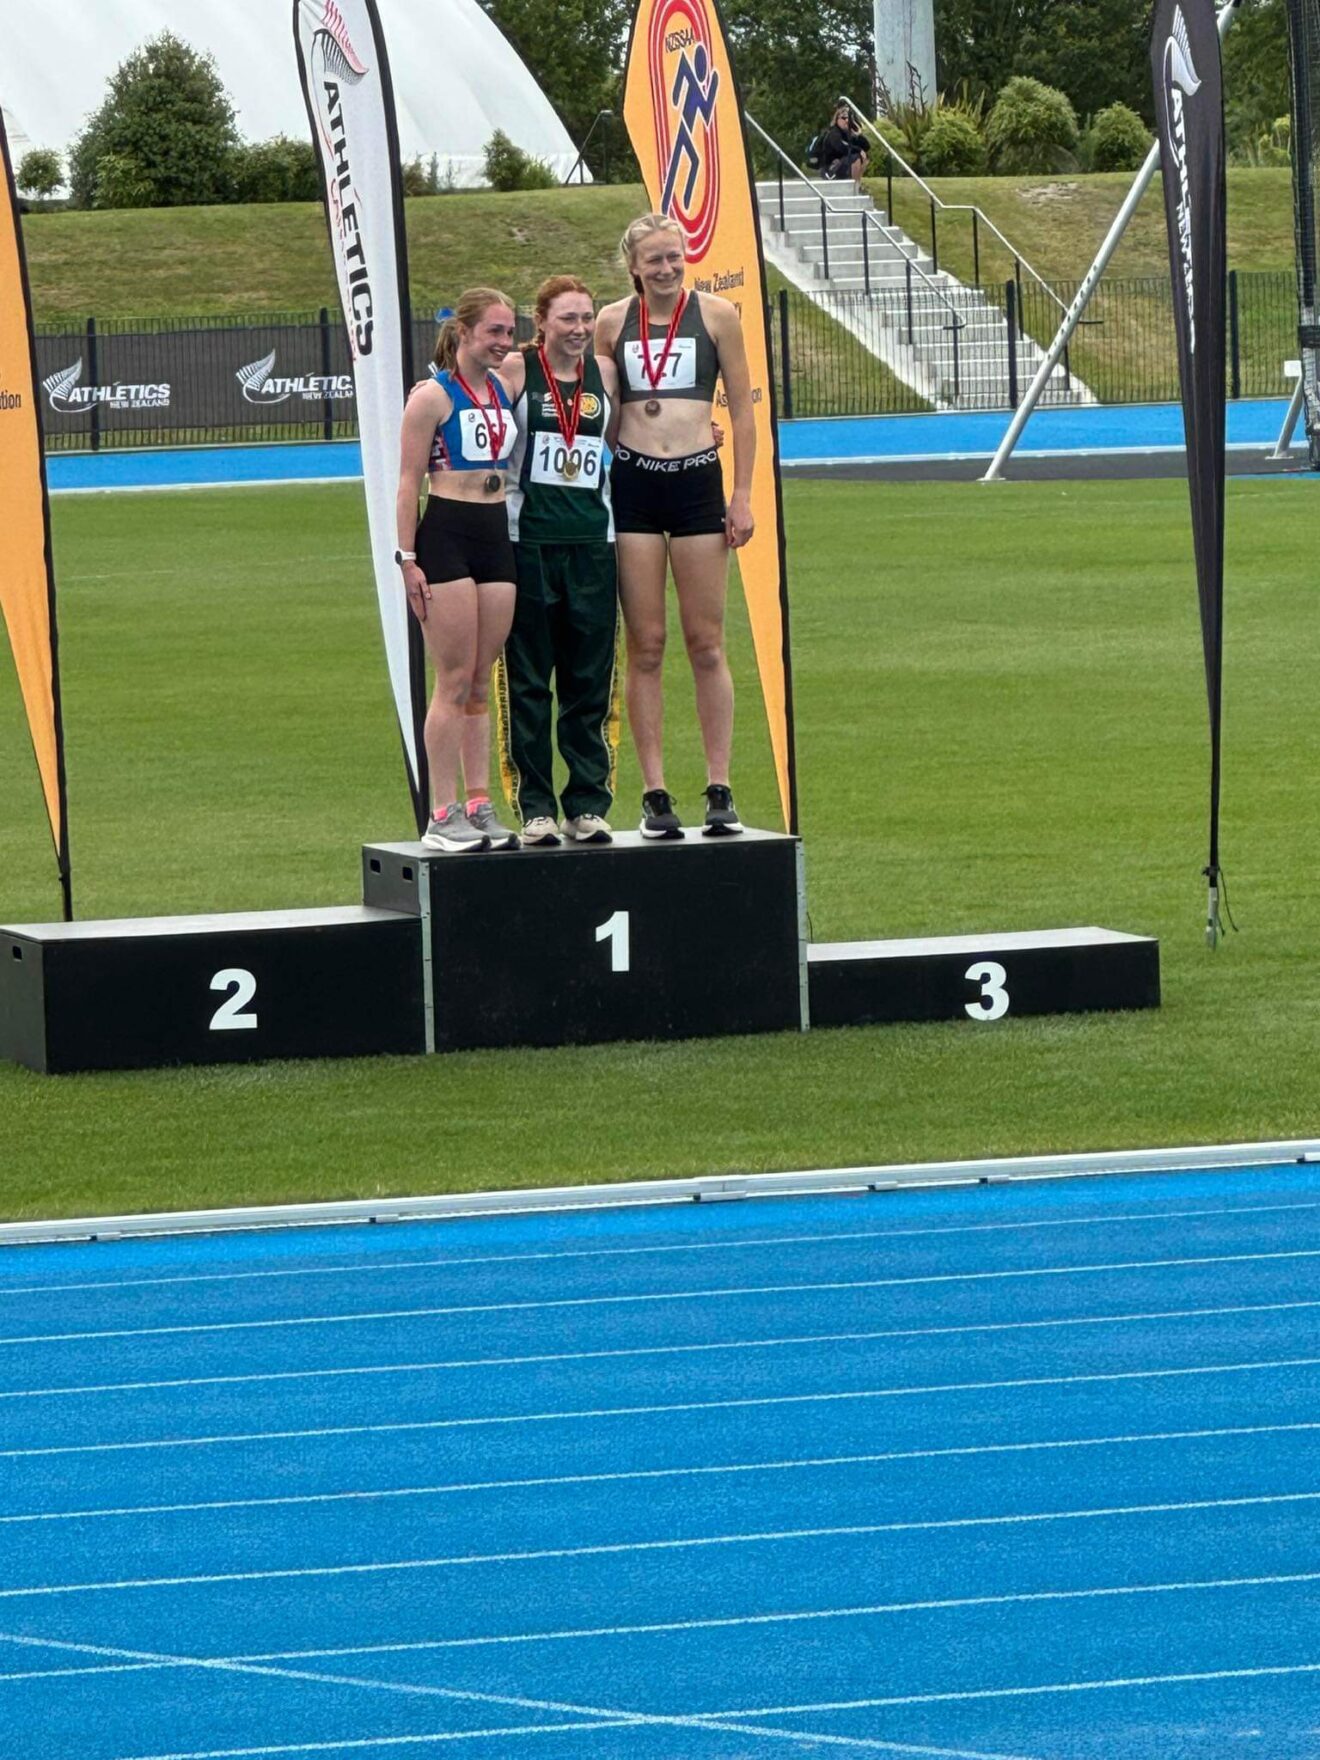 Amelie Fairclough wins Gold at the NZSS Athletics Champs!